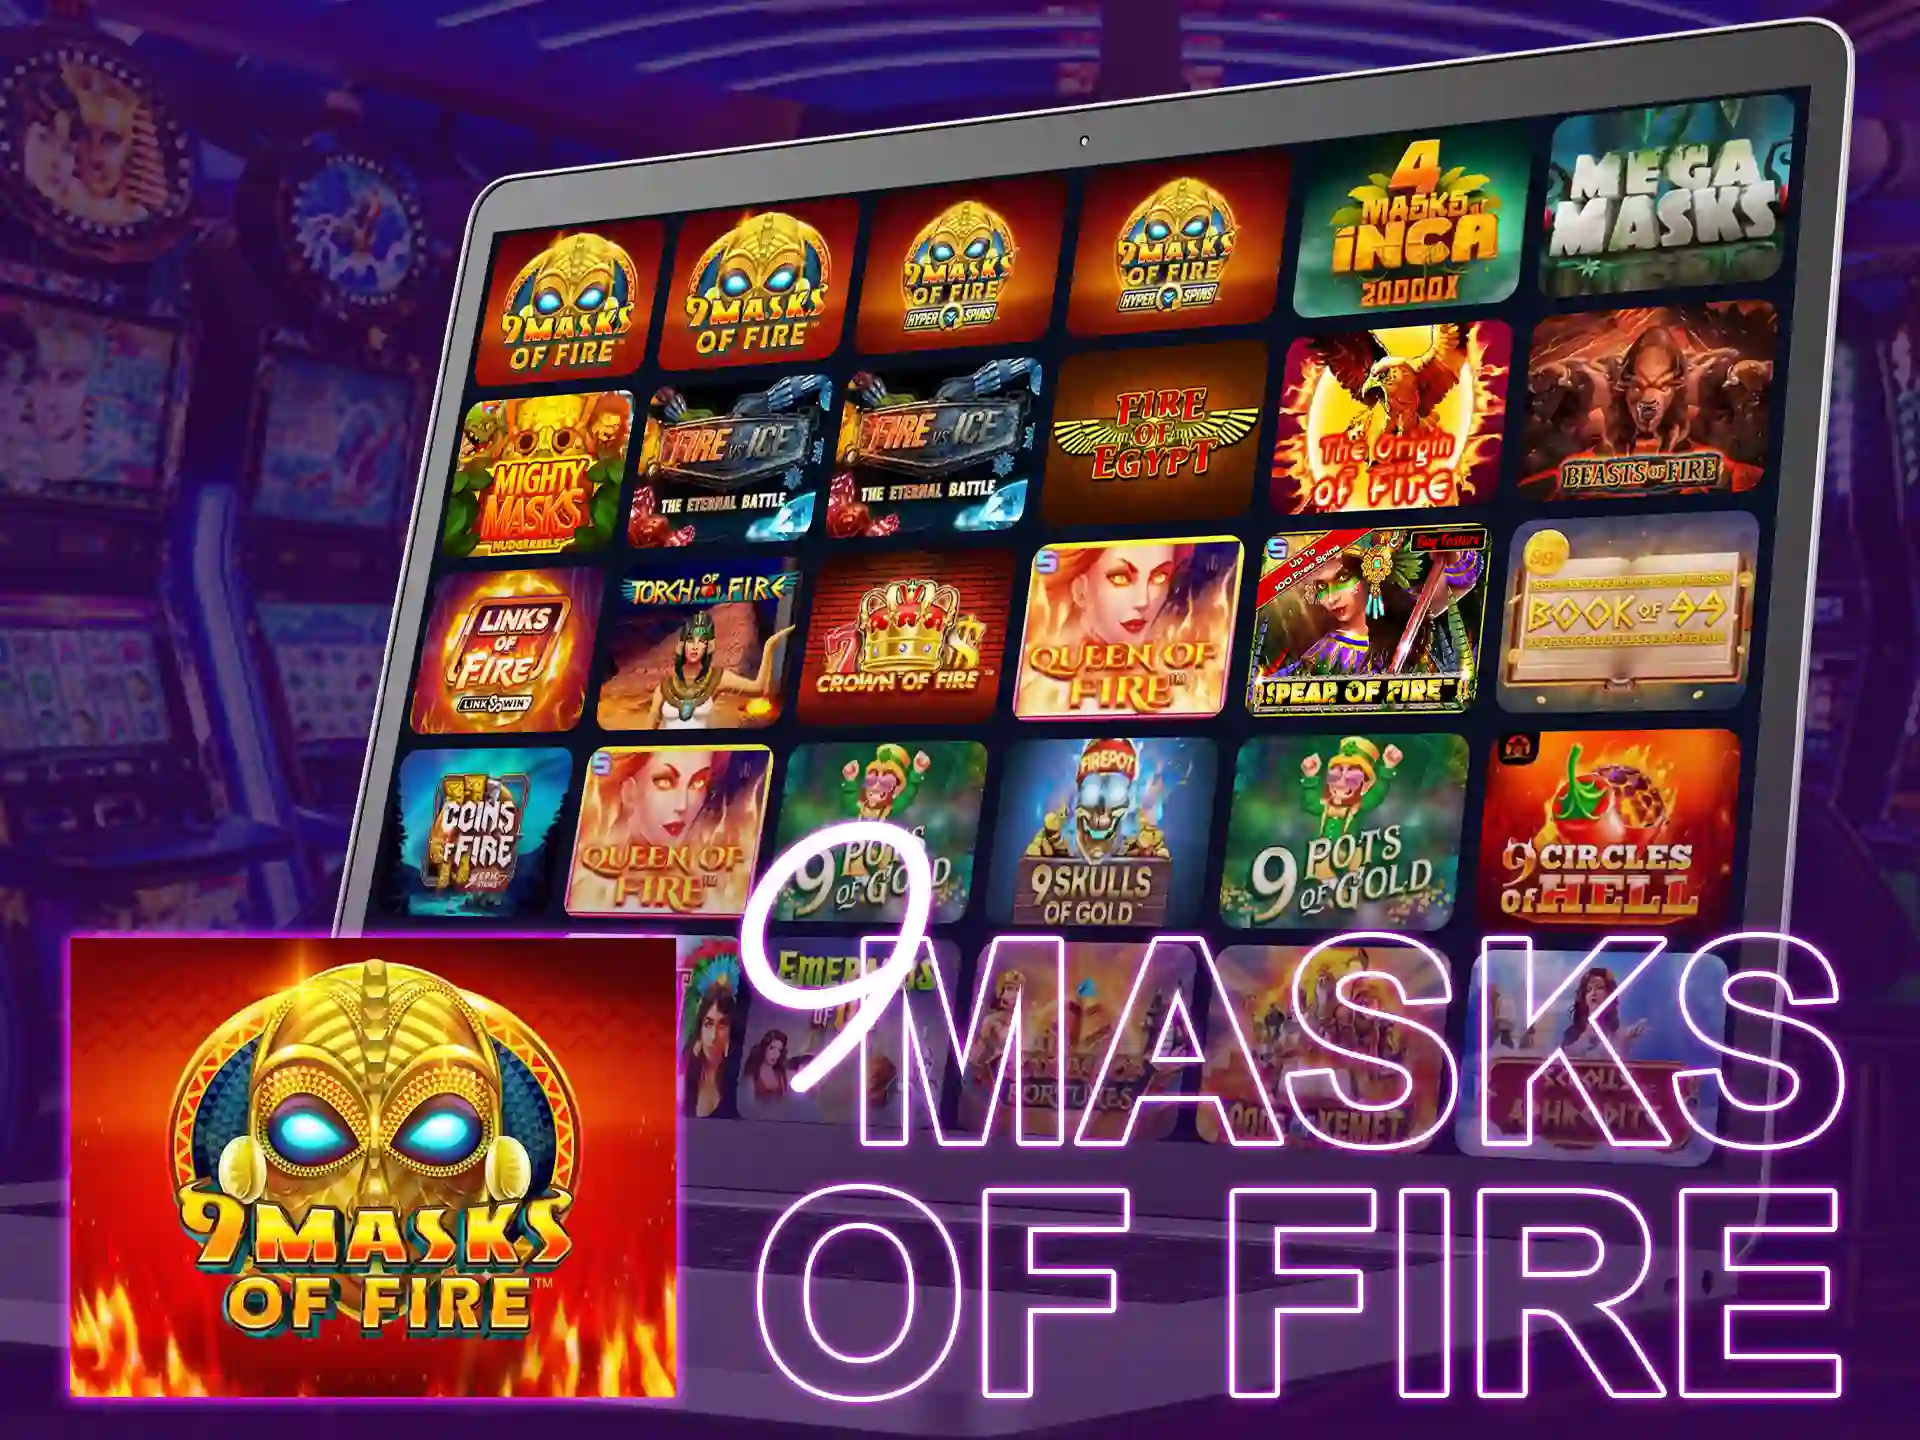 A world of unique traditions and rituals in the 9 Masks of Fire slot from Microgaming provider.